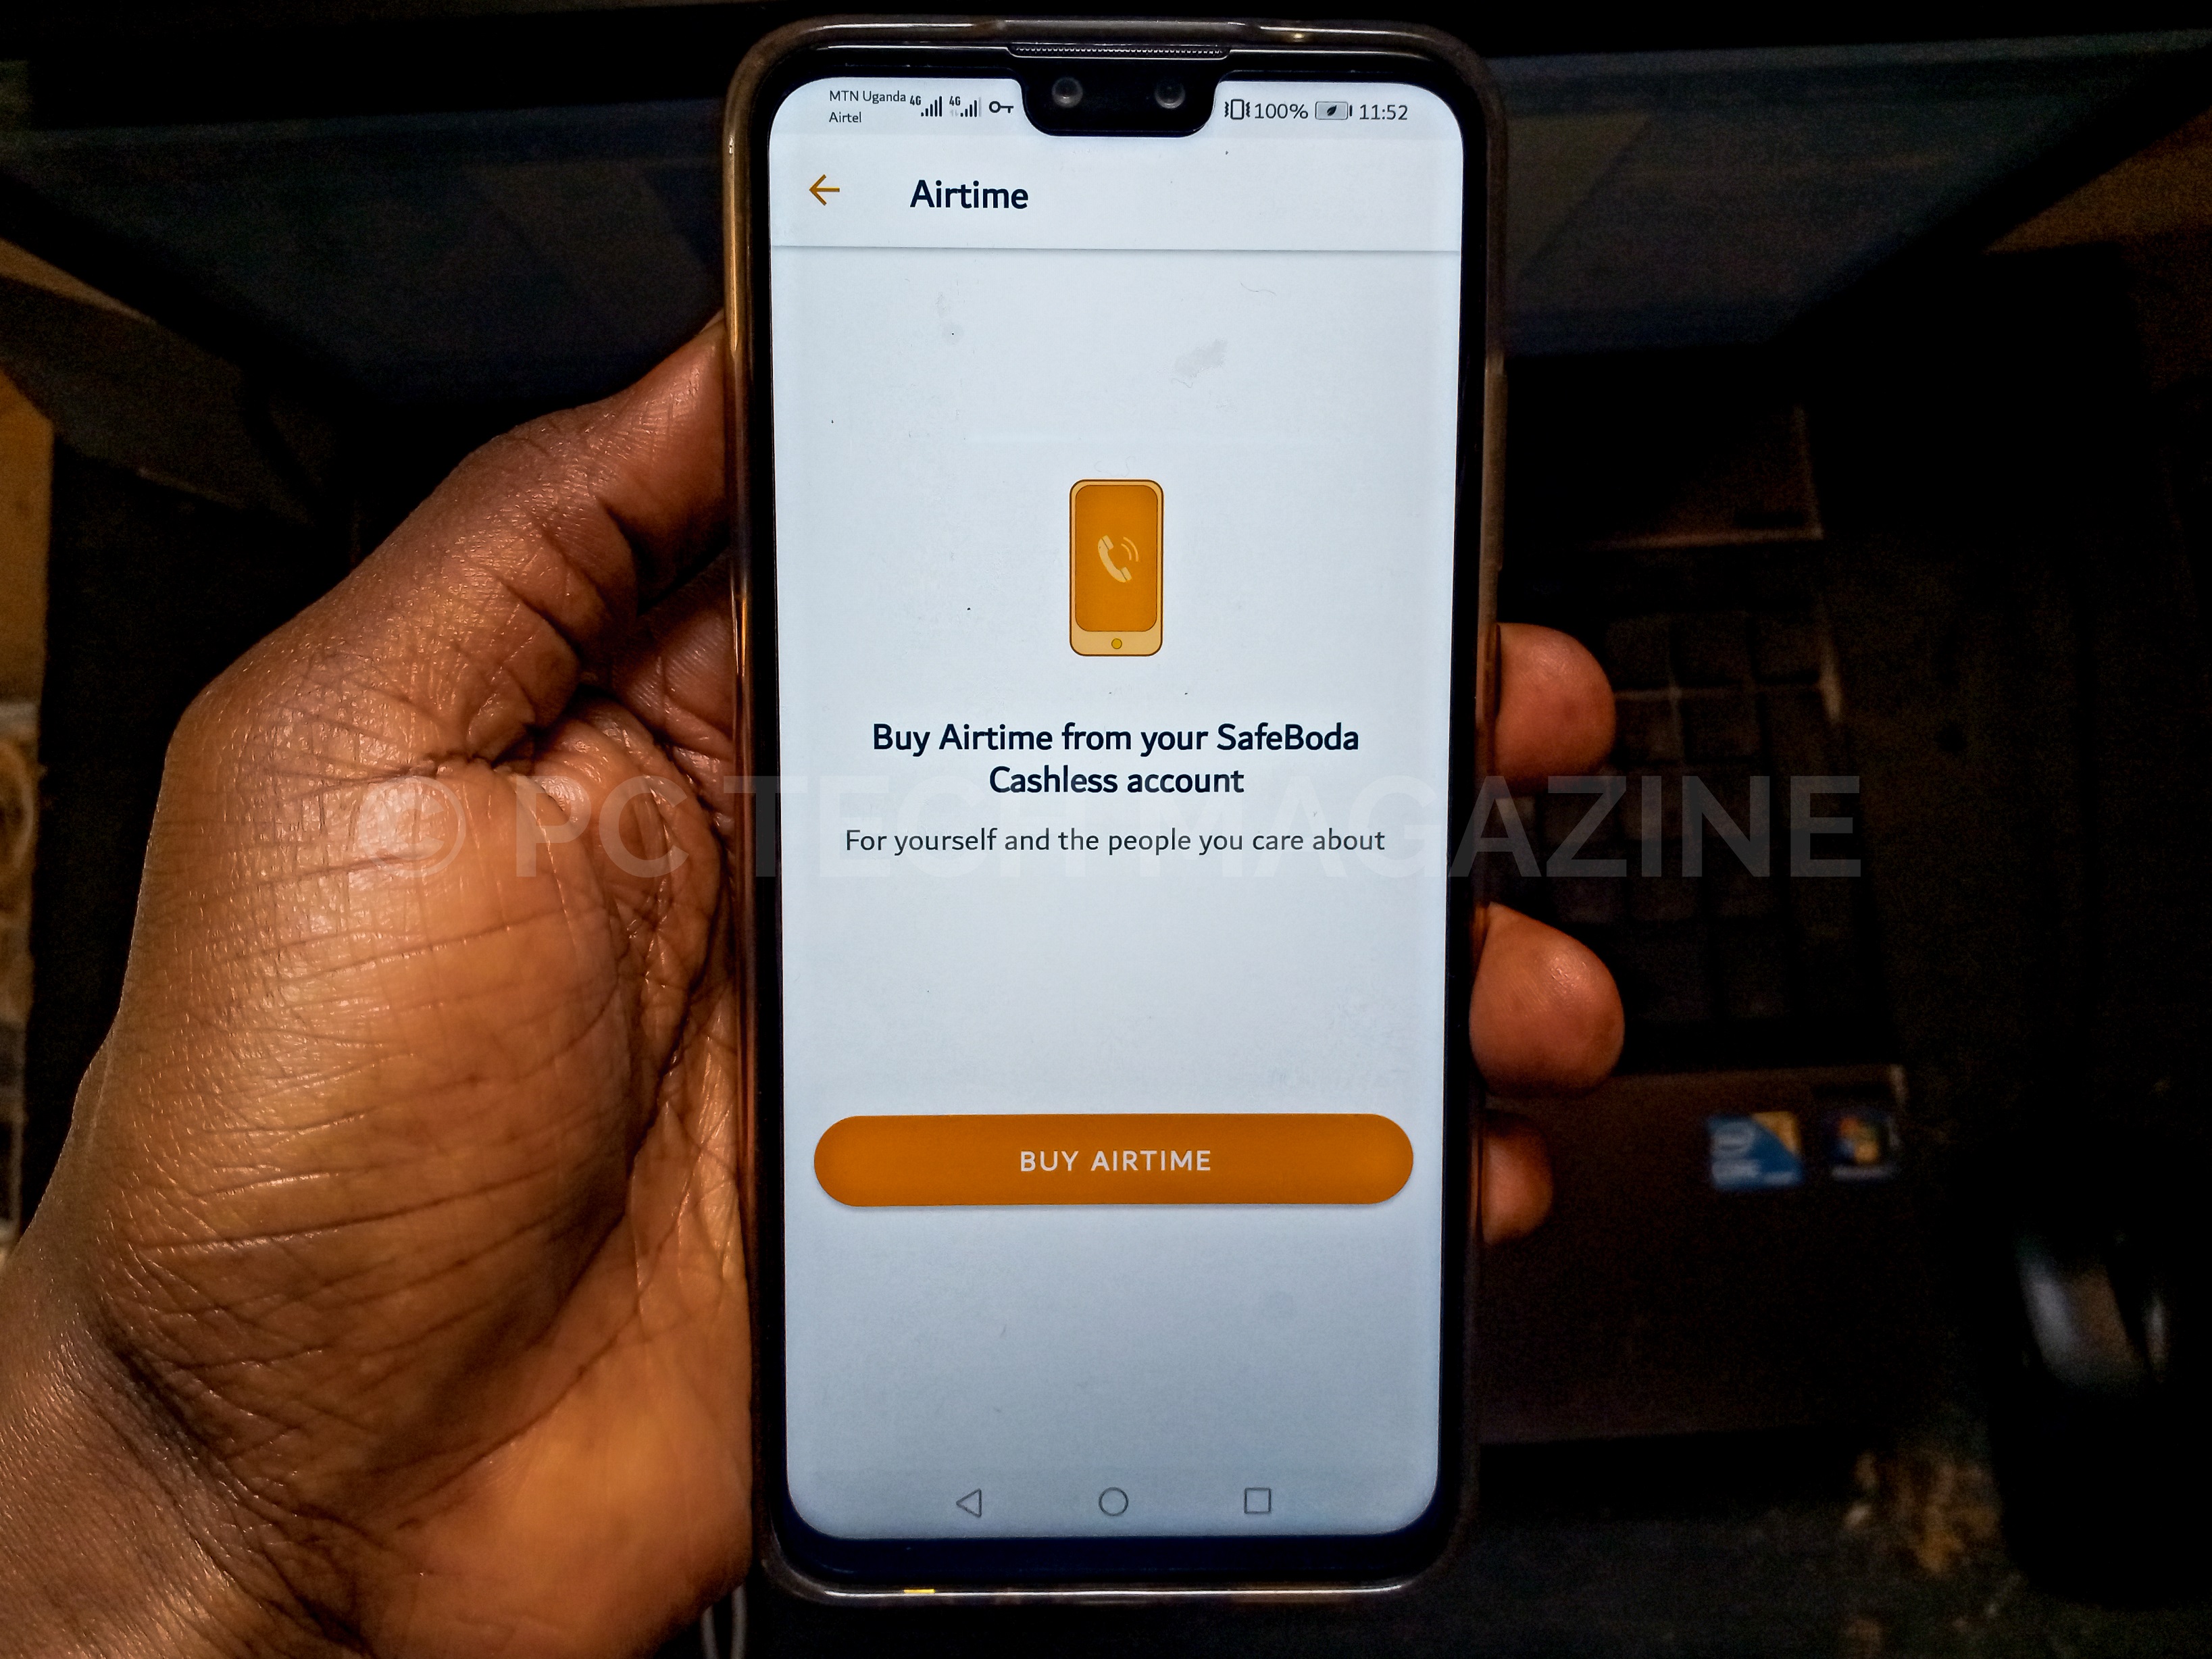 Buying airtime from the safeboda cashless account.